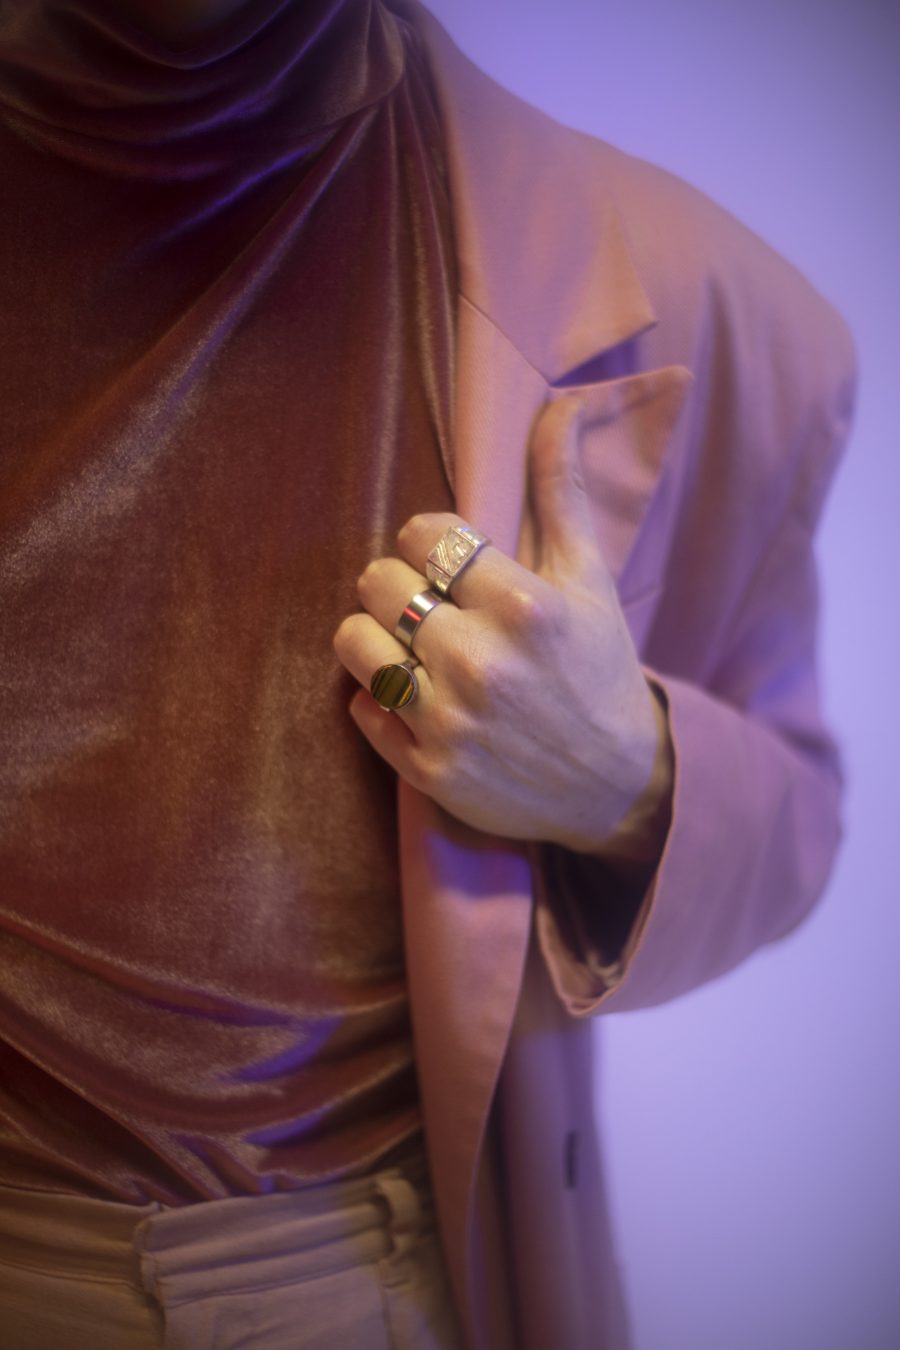 A close-up of Patrick's hands, with his jewellery showing.